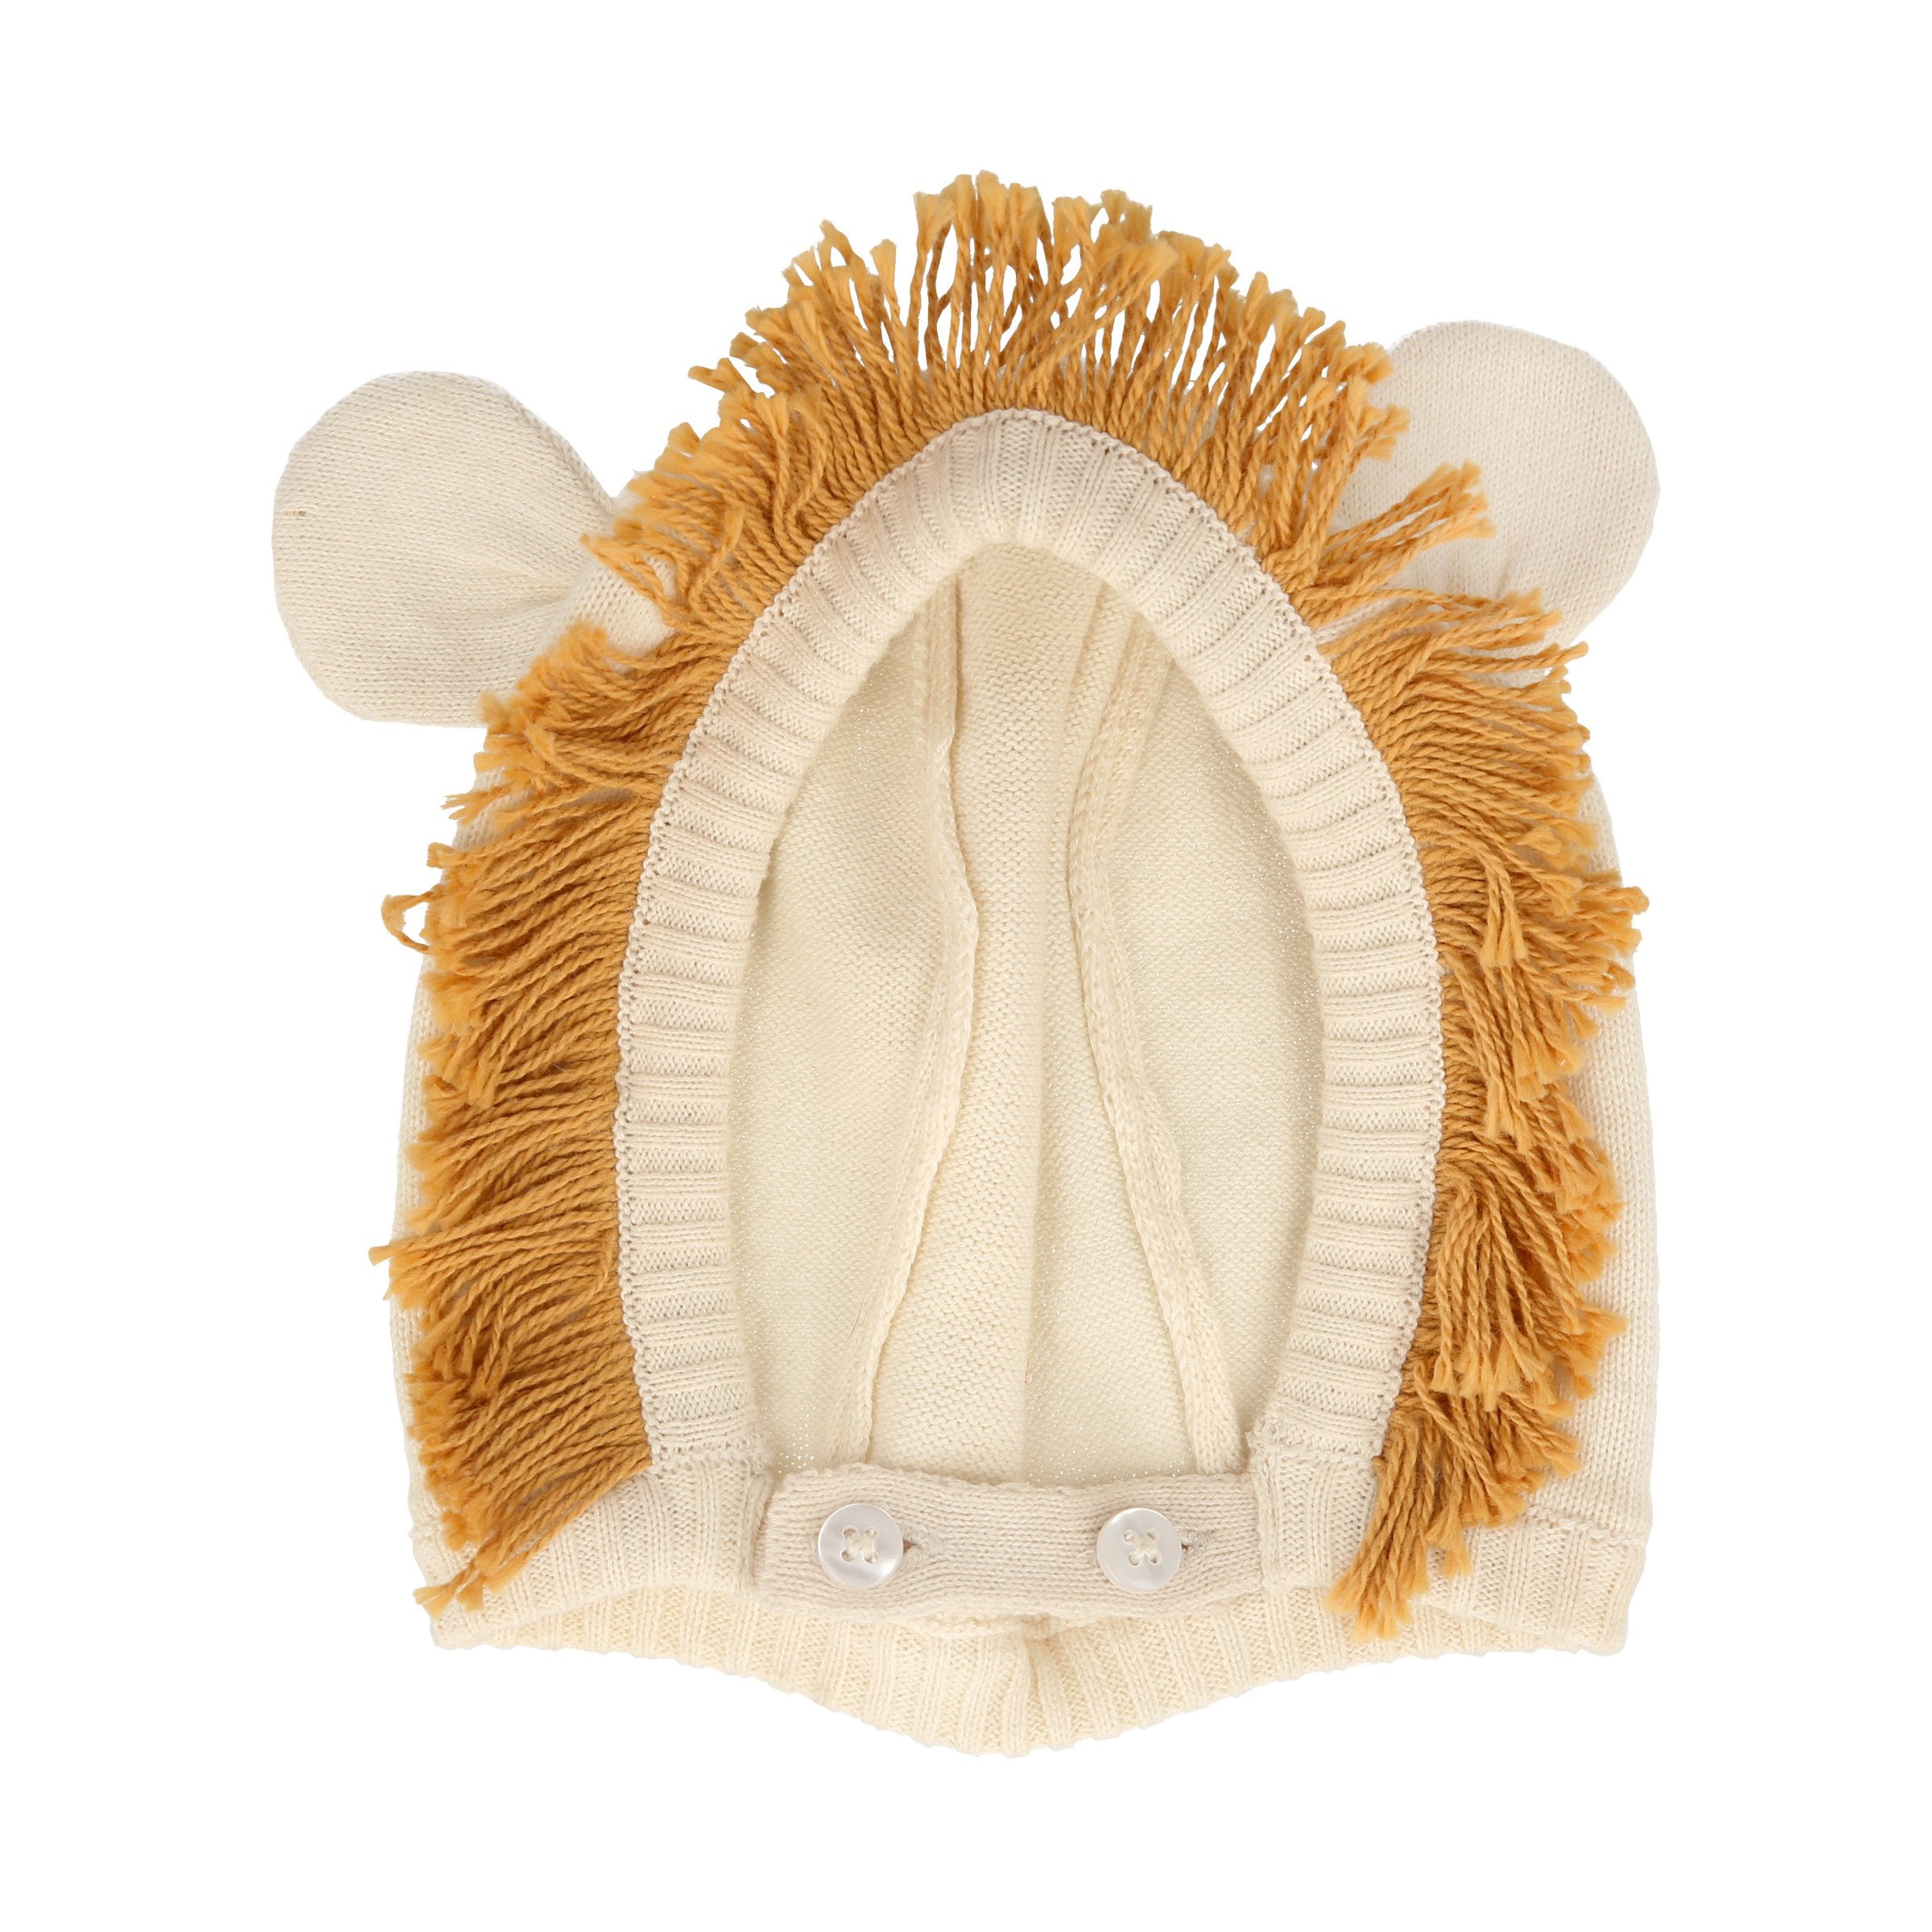 If you're looking for baby shower gift ideas then you'll love our organic cotton 0-6 month baby hat designed with adorable lion features.